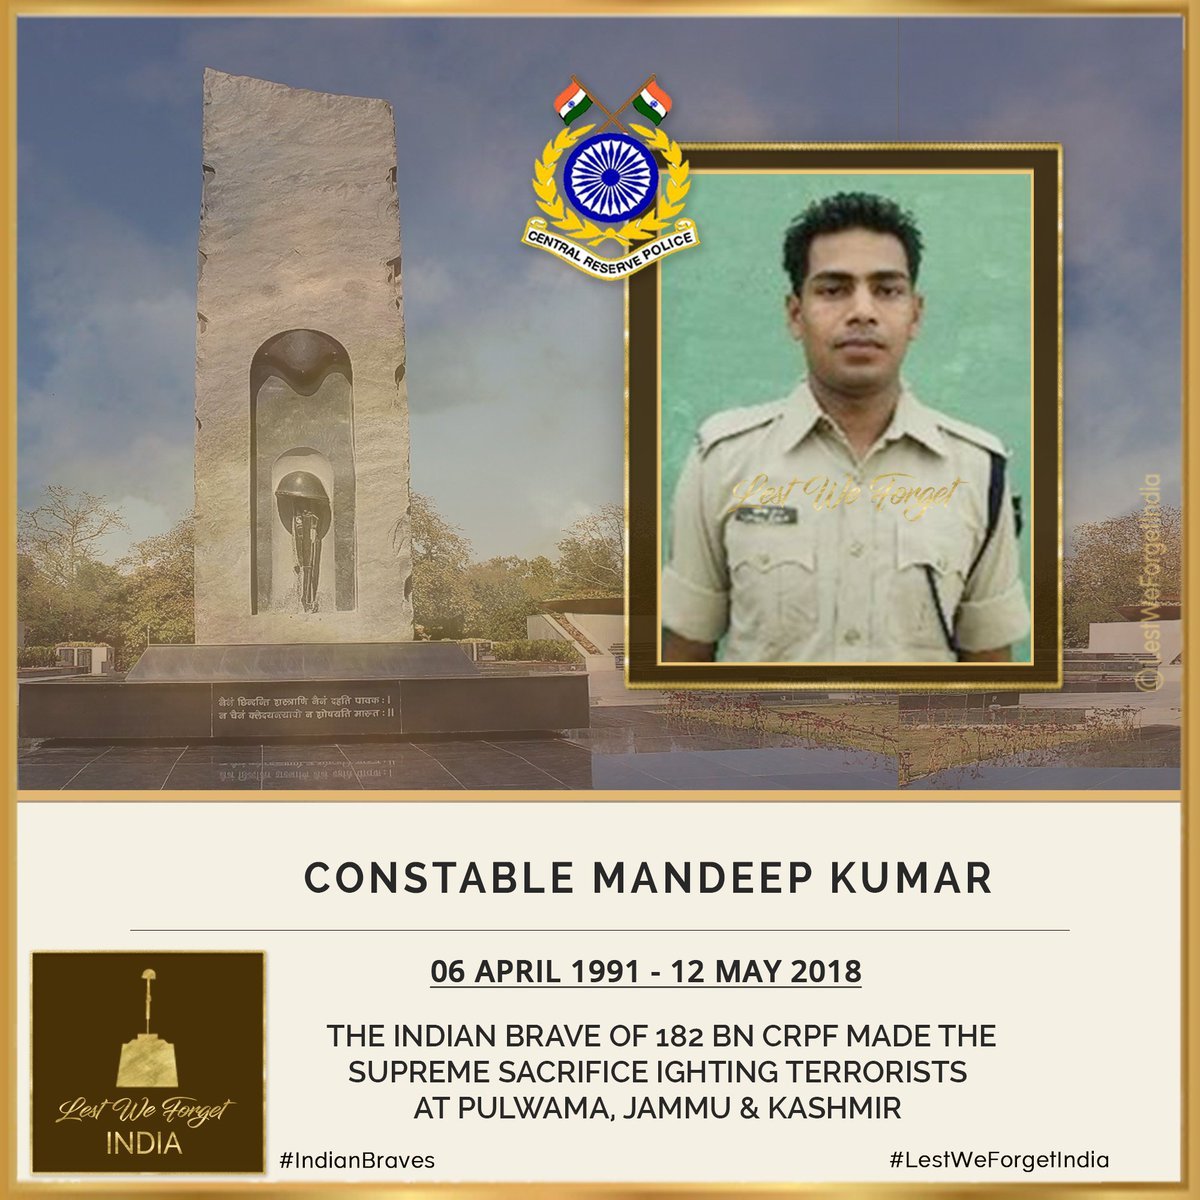 #LestWeForgetIndia🇮🇳 Constable Mandeep Kumar, 182 BN @crpfindia laid down his life fighting terrorists at Pulwama, Jammu & Kashmir, #OnThisDay 12 May in 2018 Remember the #IndianBrave, his valour, service & supreme sacrifice for the Nation always